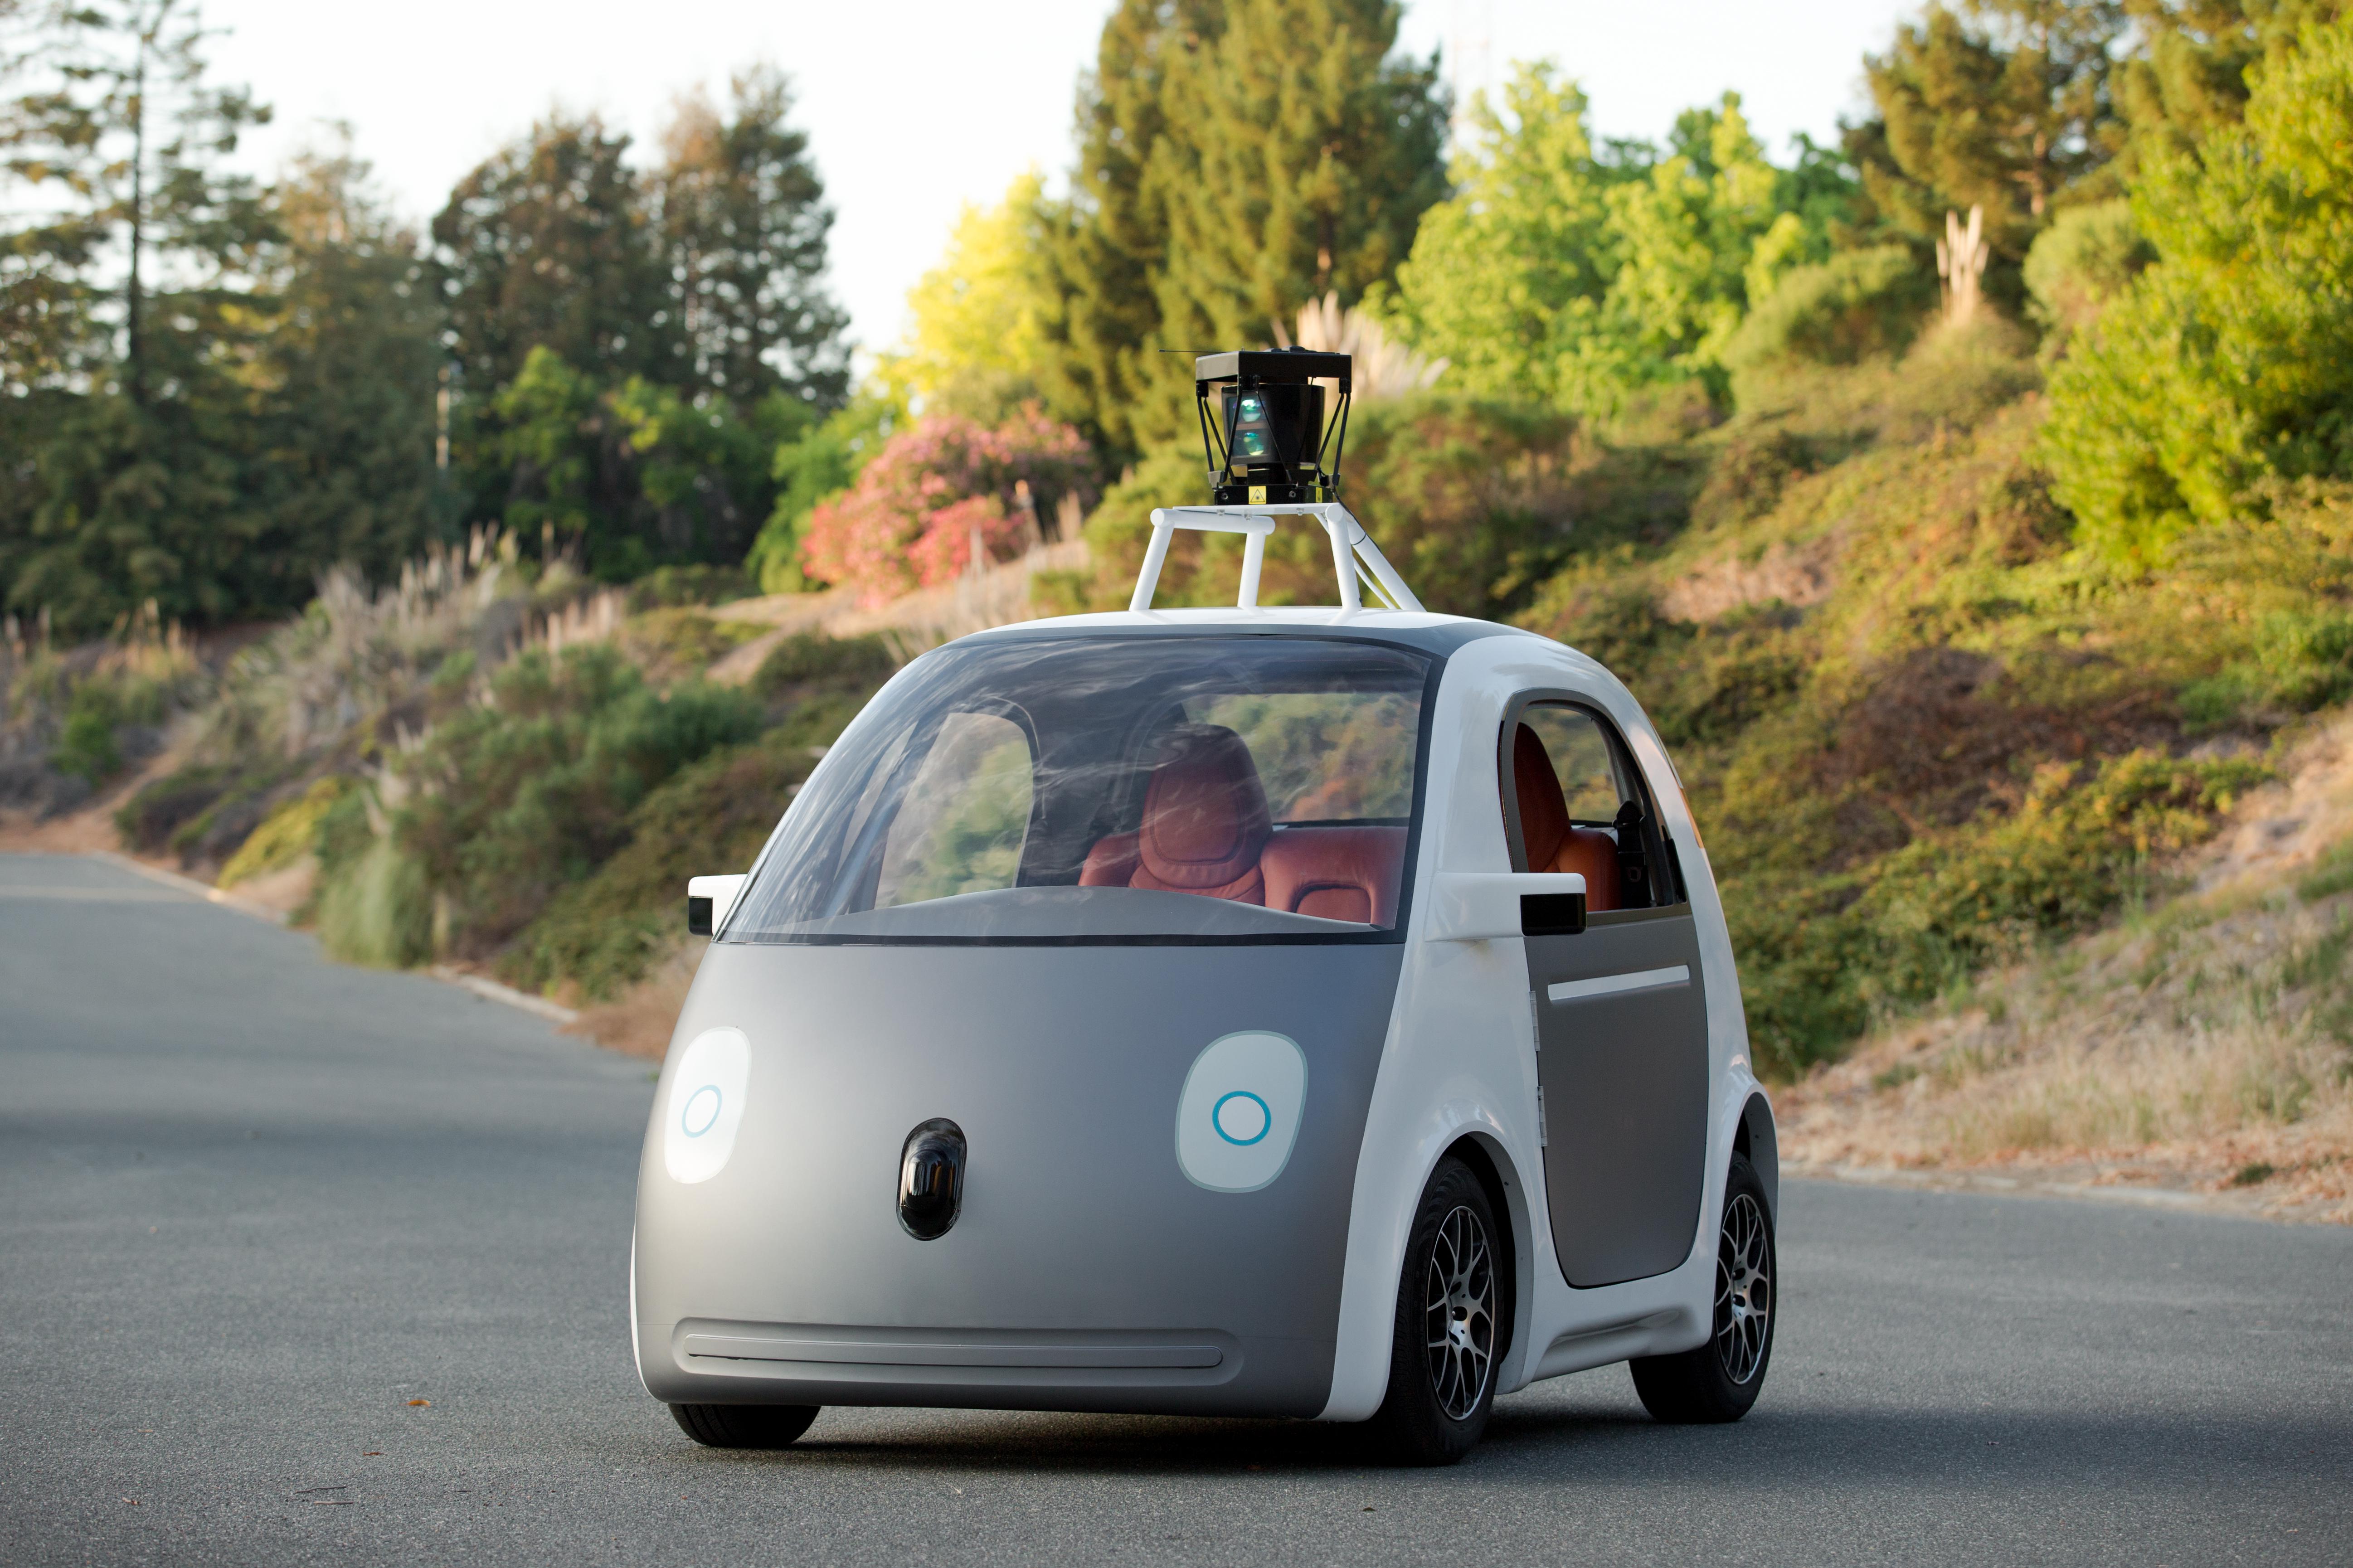 Google's new self-driving car doesn't require a driver at all.